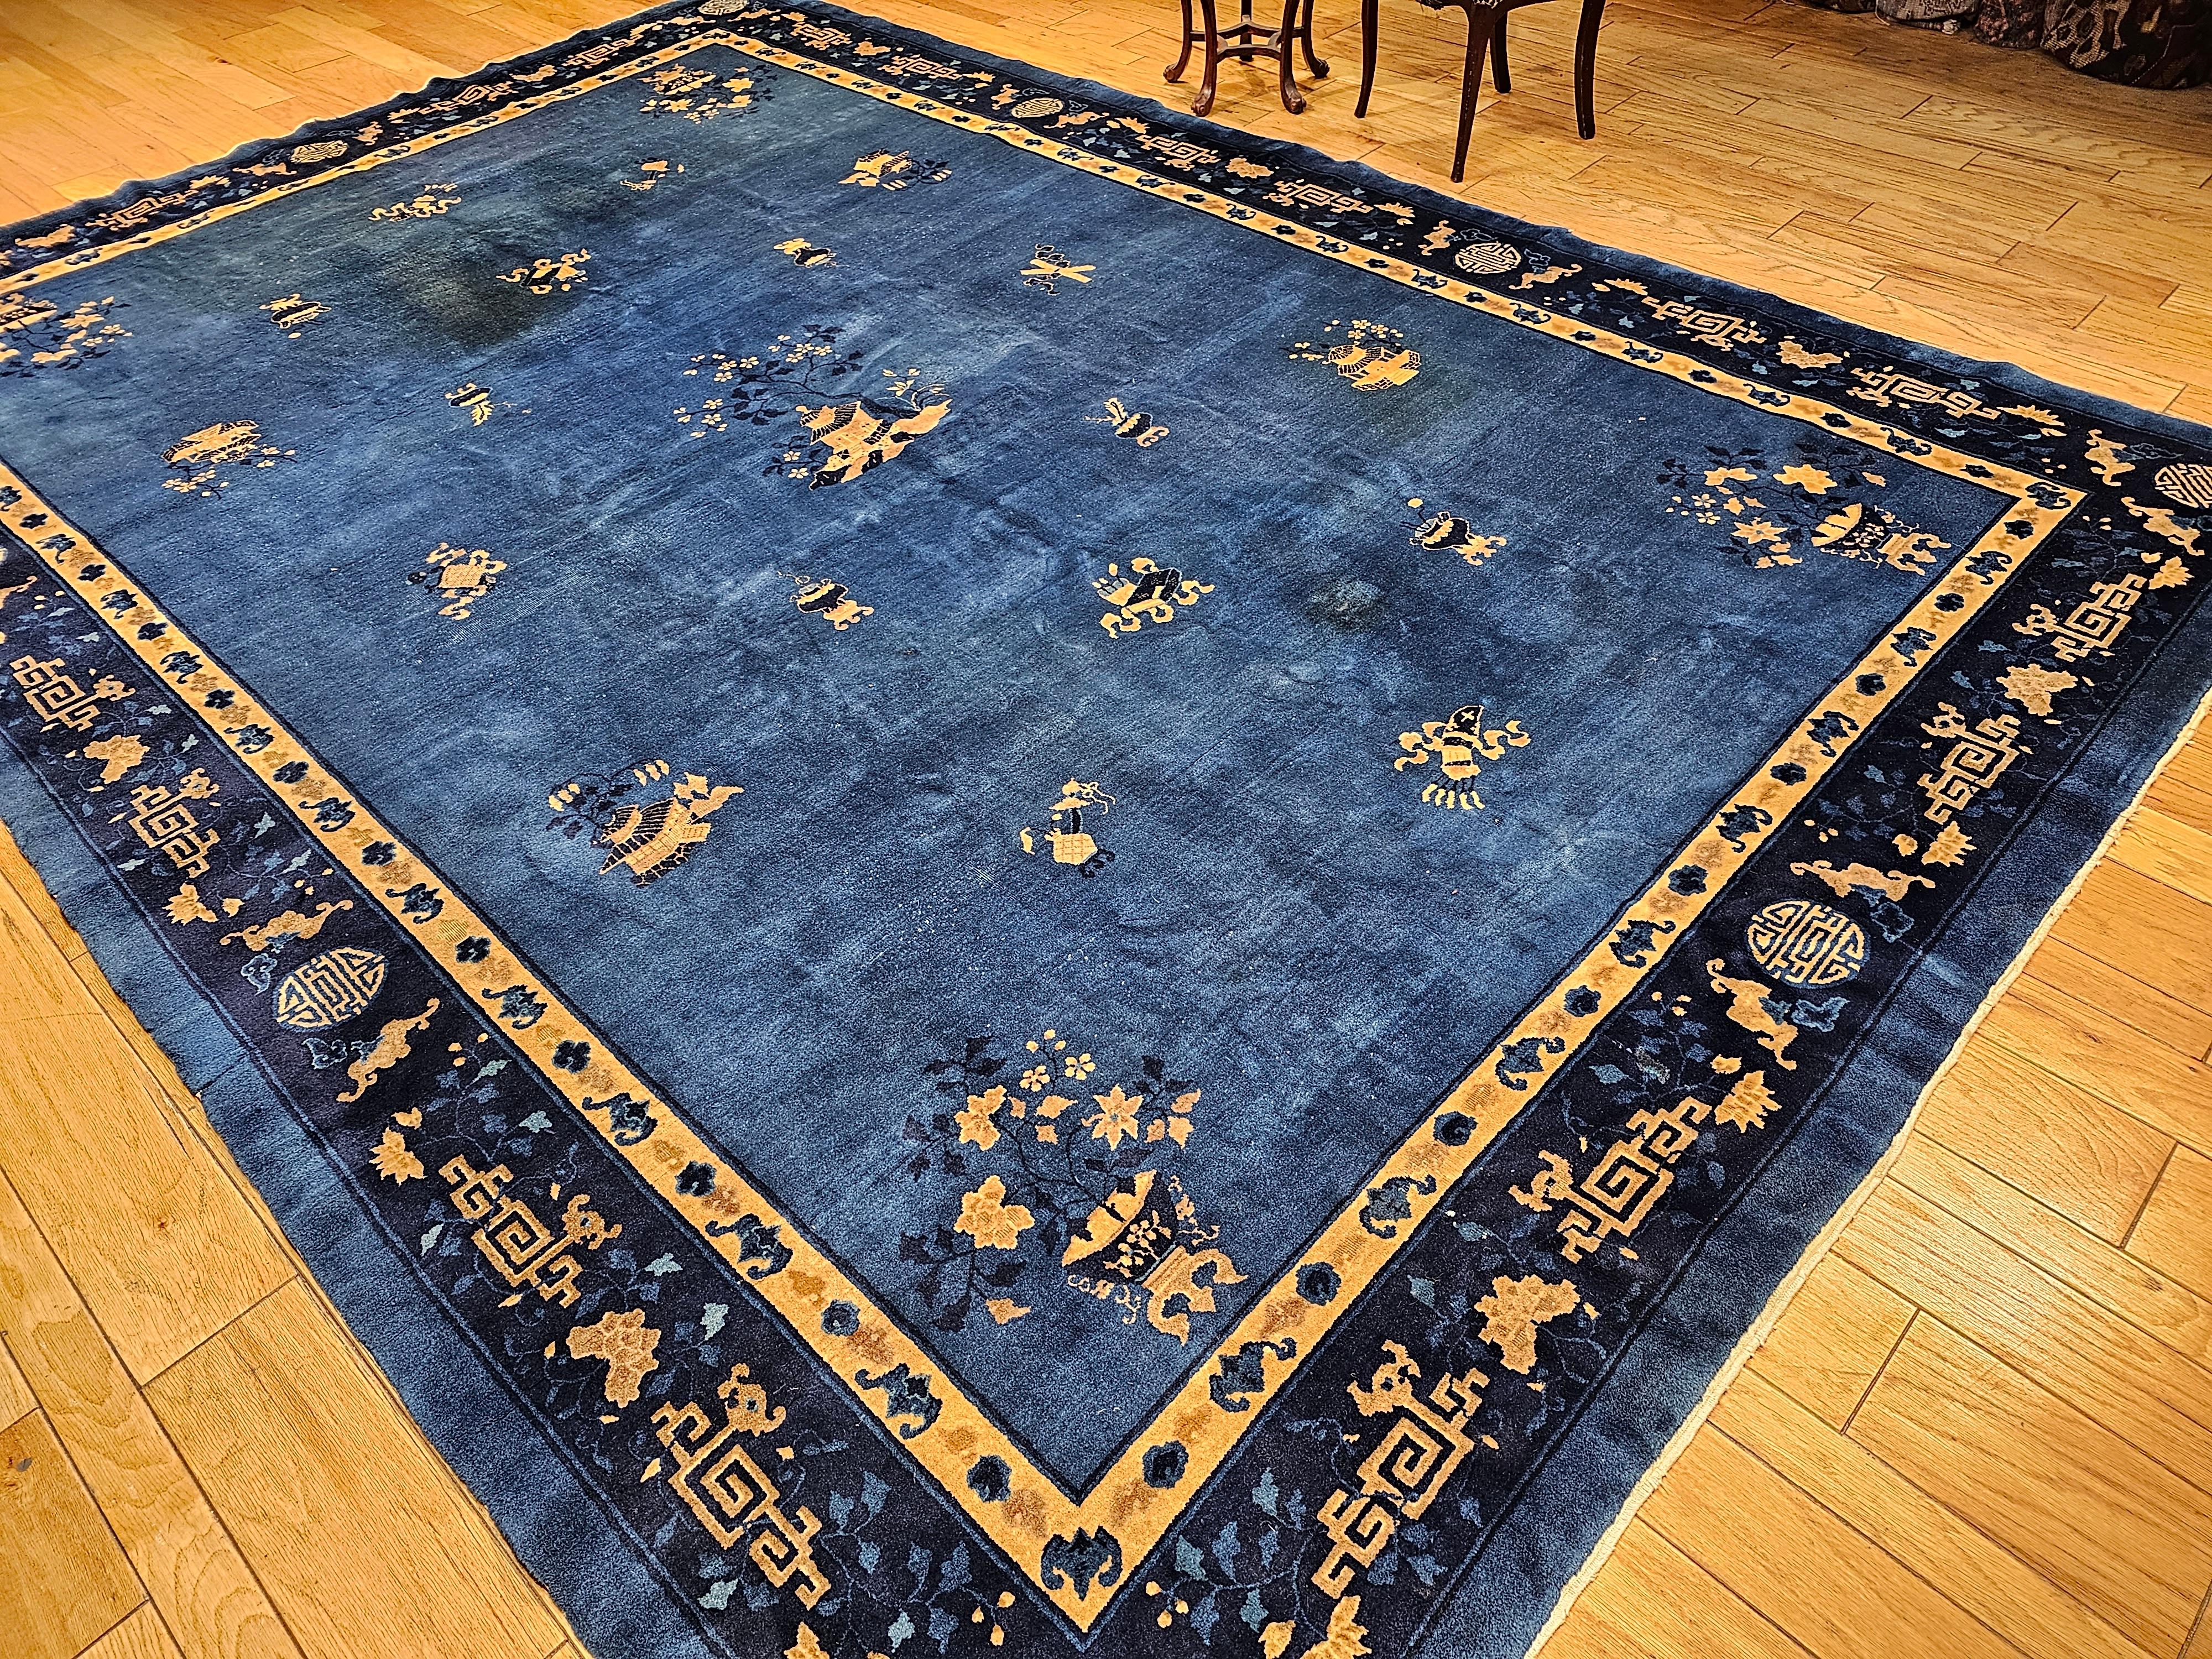 Vintage Art Deco Chinese Rug with Auspicious Symbols in Royal Blue, Navy, Camel For Sale 3